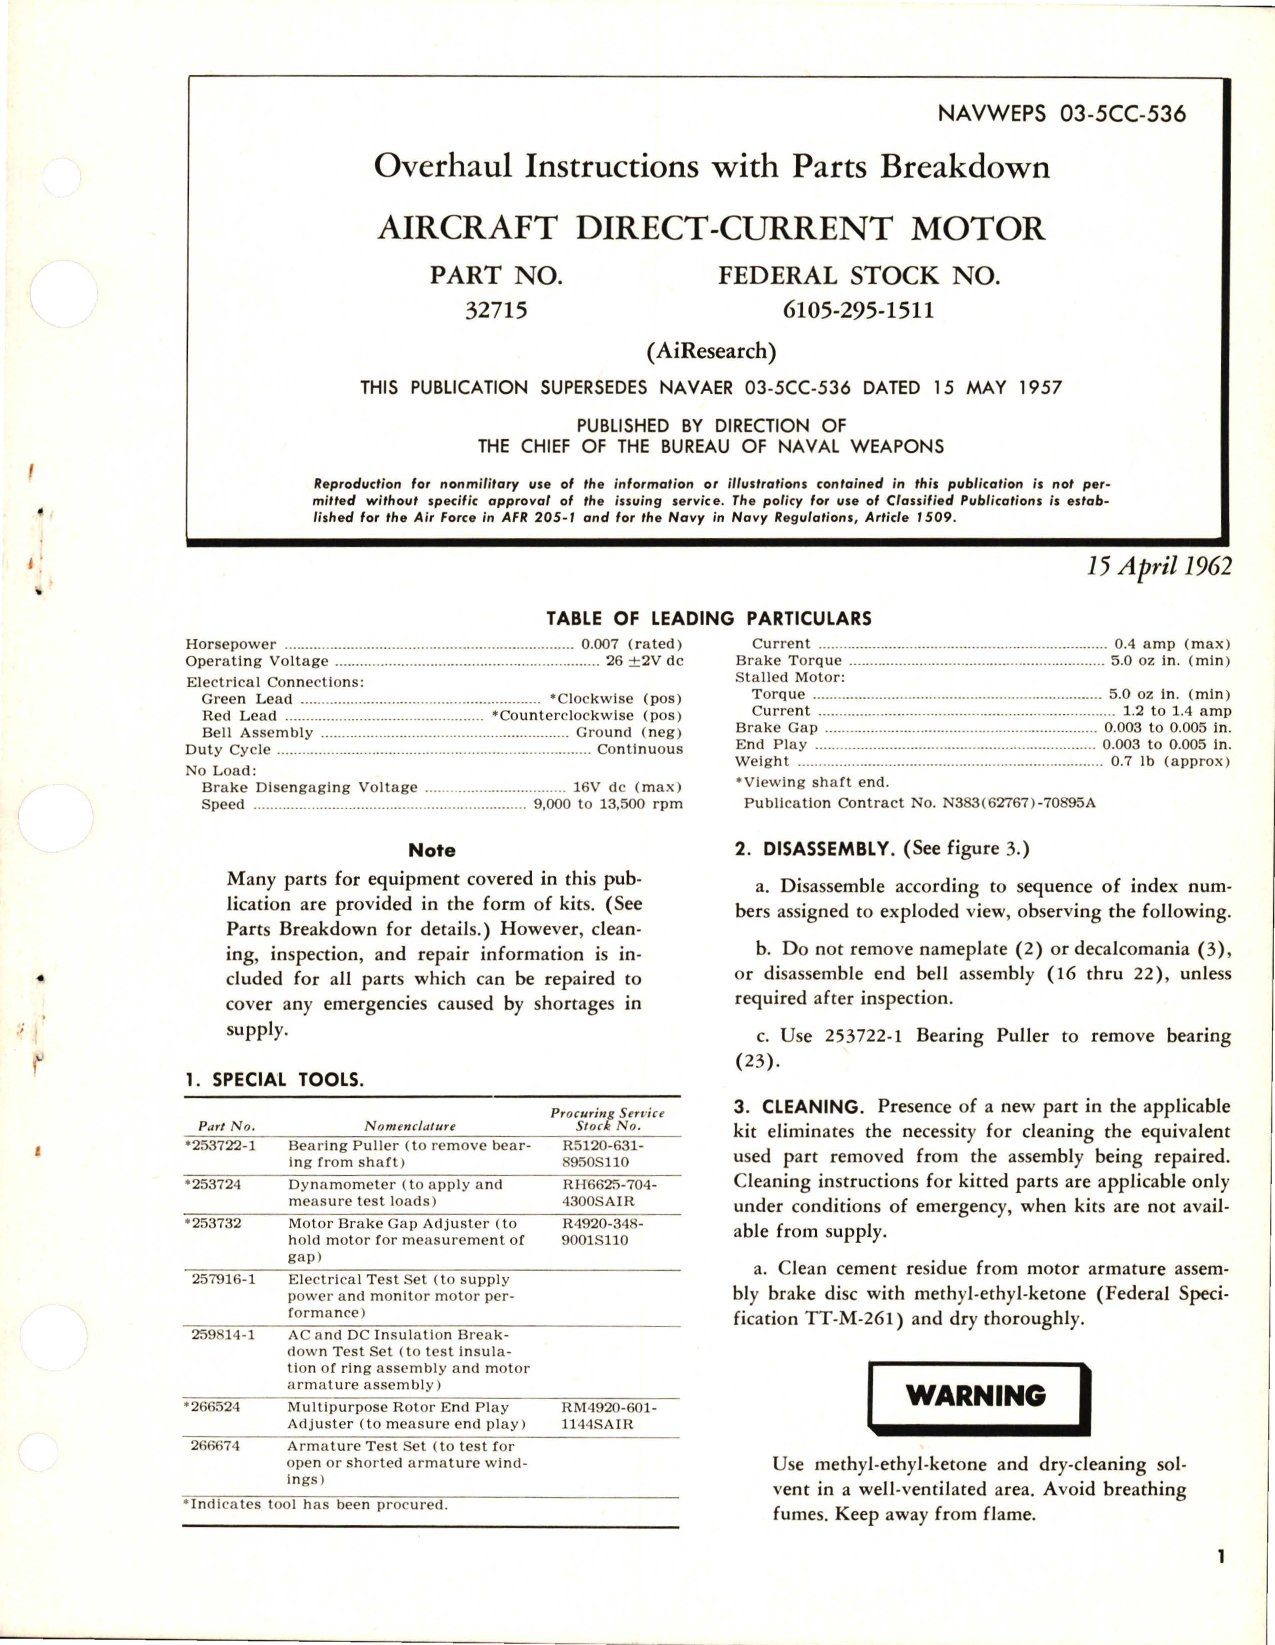 Sample page 1 from AirCorps Library document: Overhaul Instructions with Parts Breakdown for Direct Current Motor - Part 32715